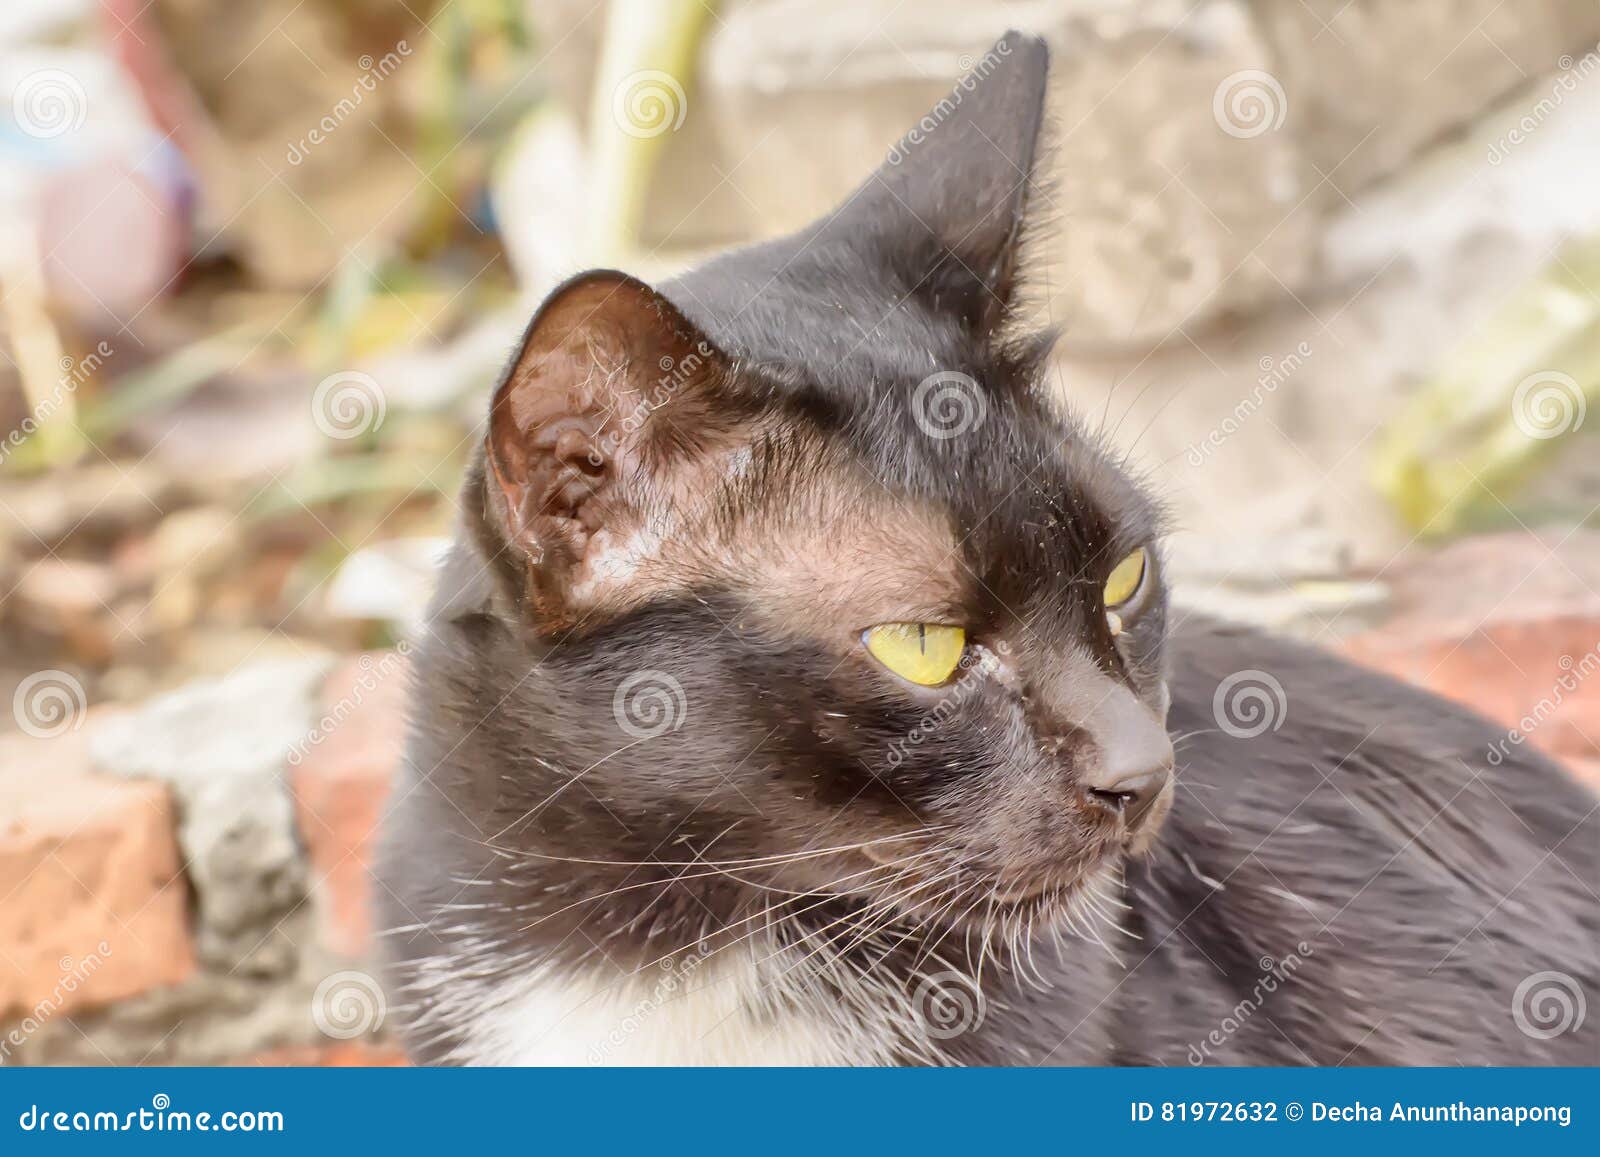 Eye boogers in cats stock photo. Image of close, health 81972632